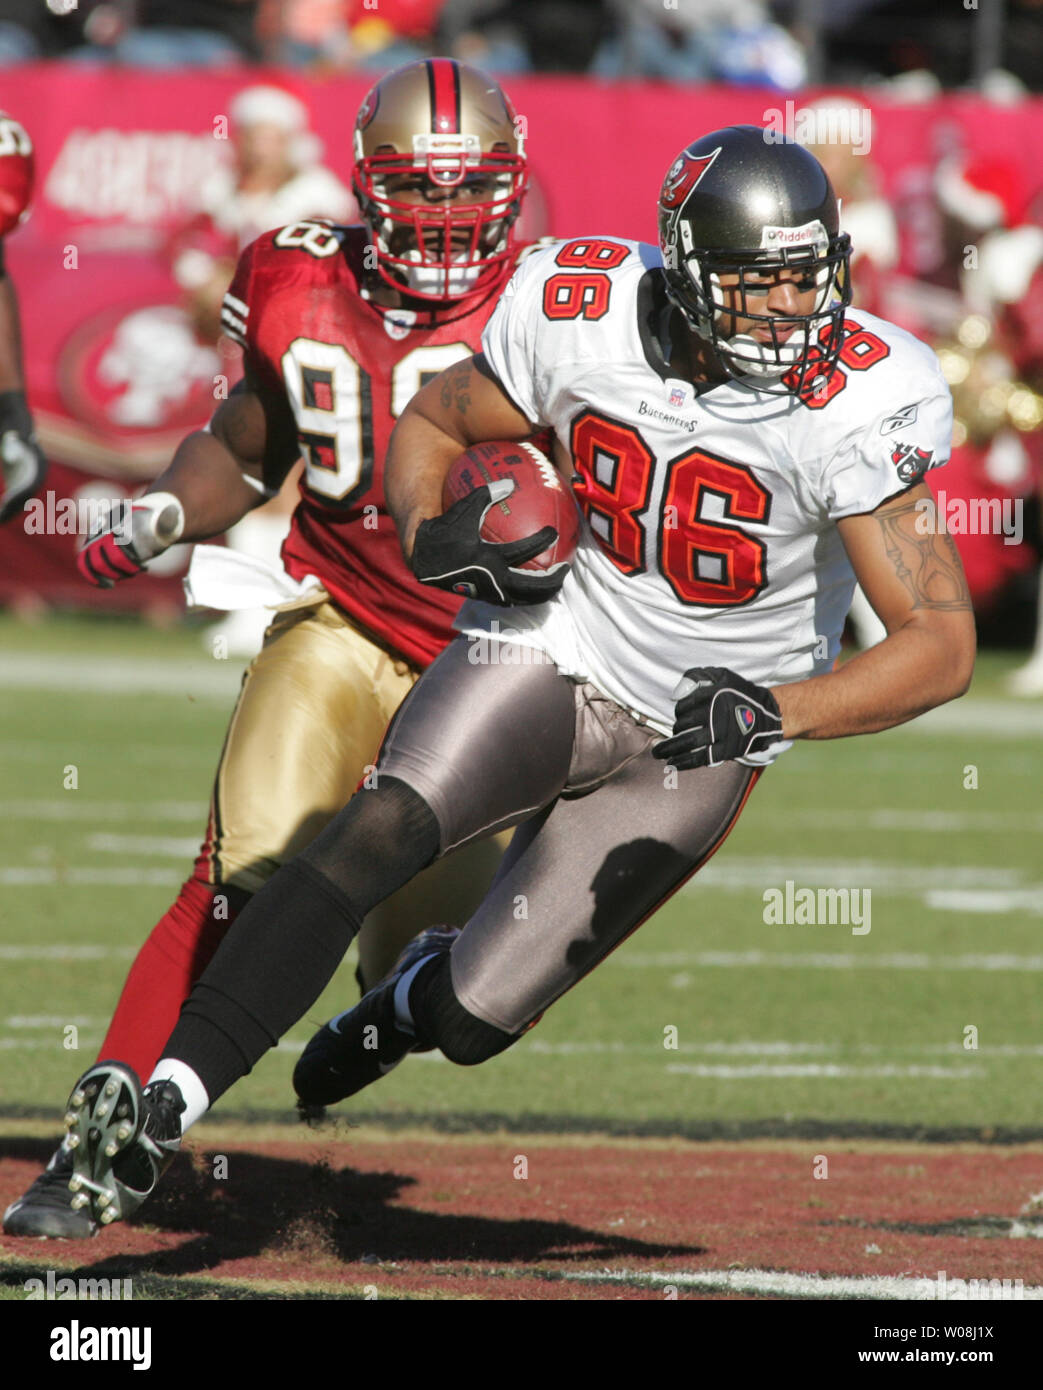 Tampa Bay Buccaneers TE Jerramy Stevens (86) takes a Jeff Garcia pass 20 yards pursued by San Francisco 49ers Parys Haralson in the second quarter at Monster Park in San Francisco on December 23, 2007. The 49ers defeated the Bucs 21-19.   (UPI Photo/Terry Schmitt) Stock Photo